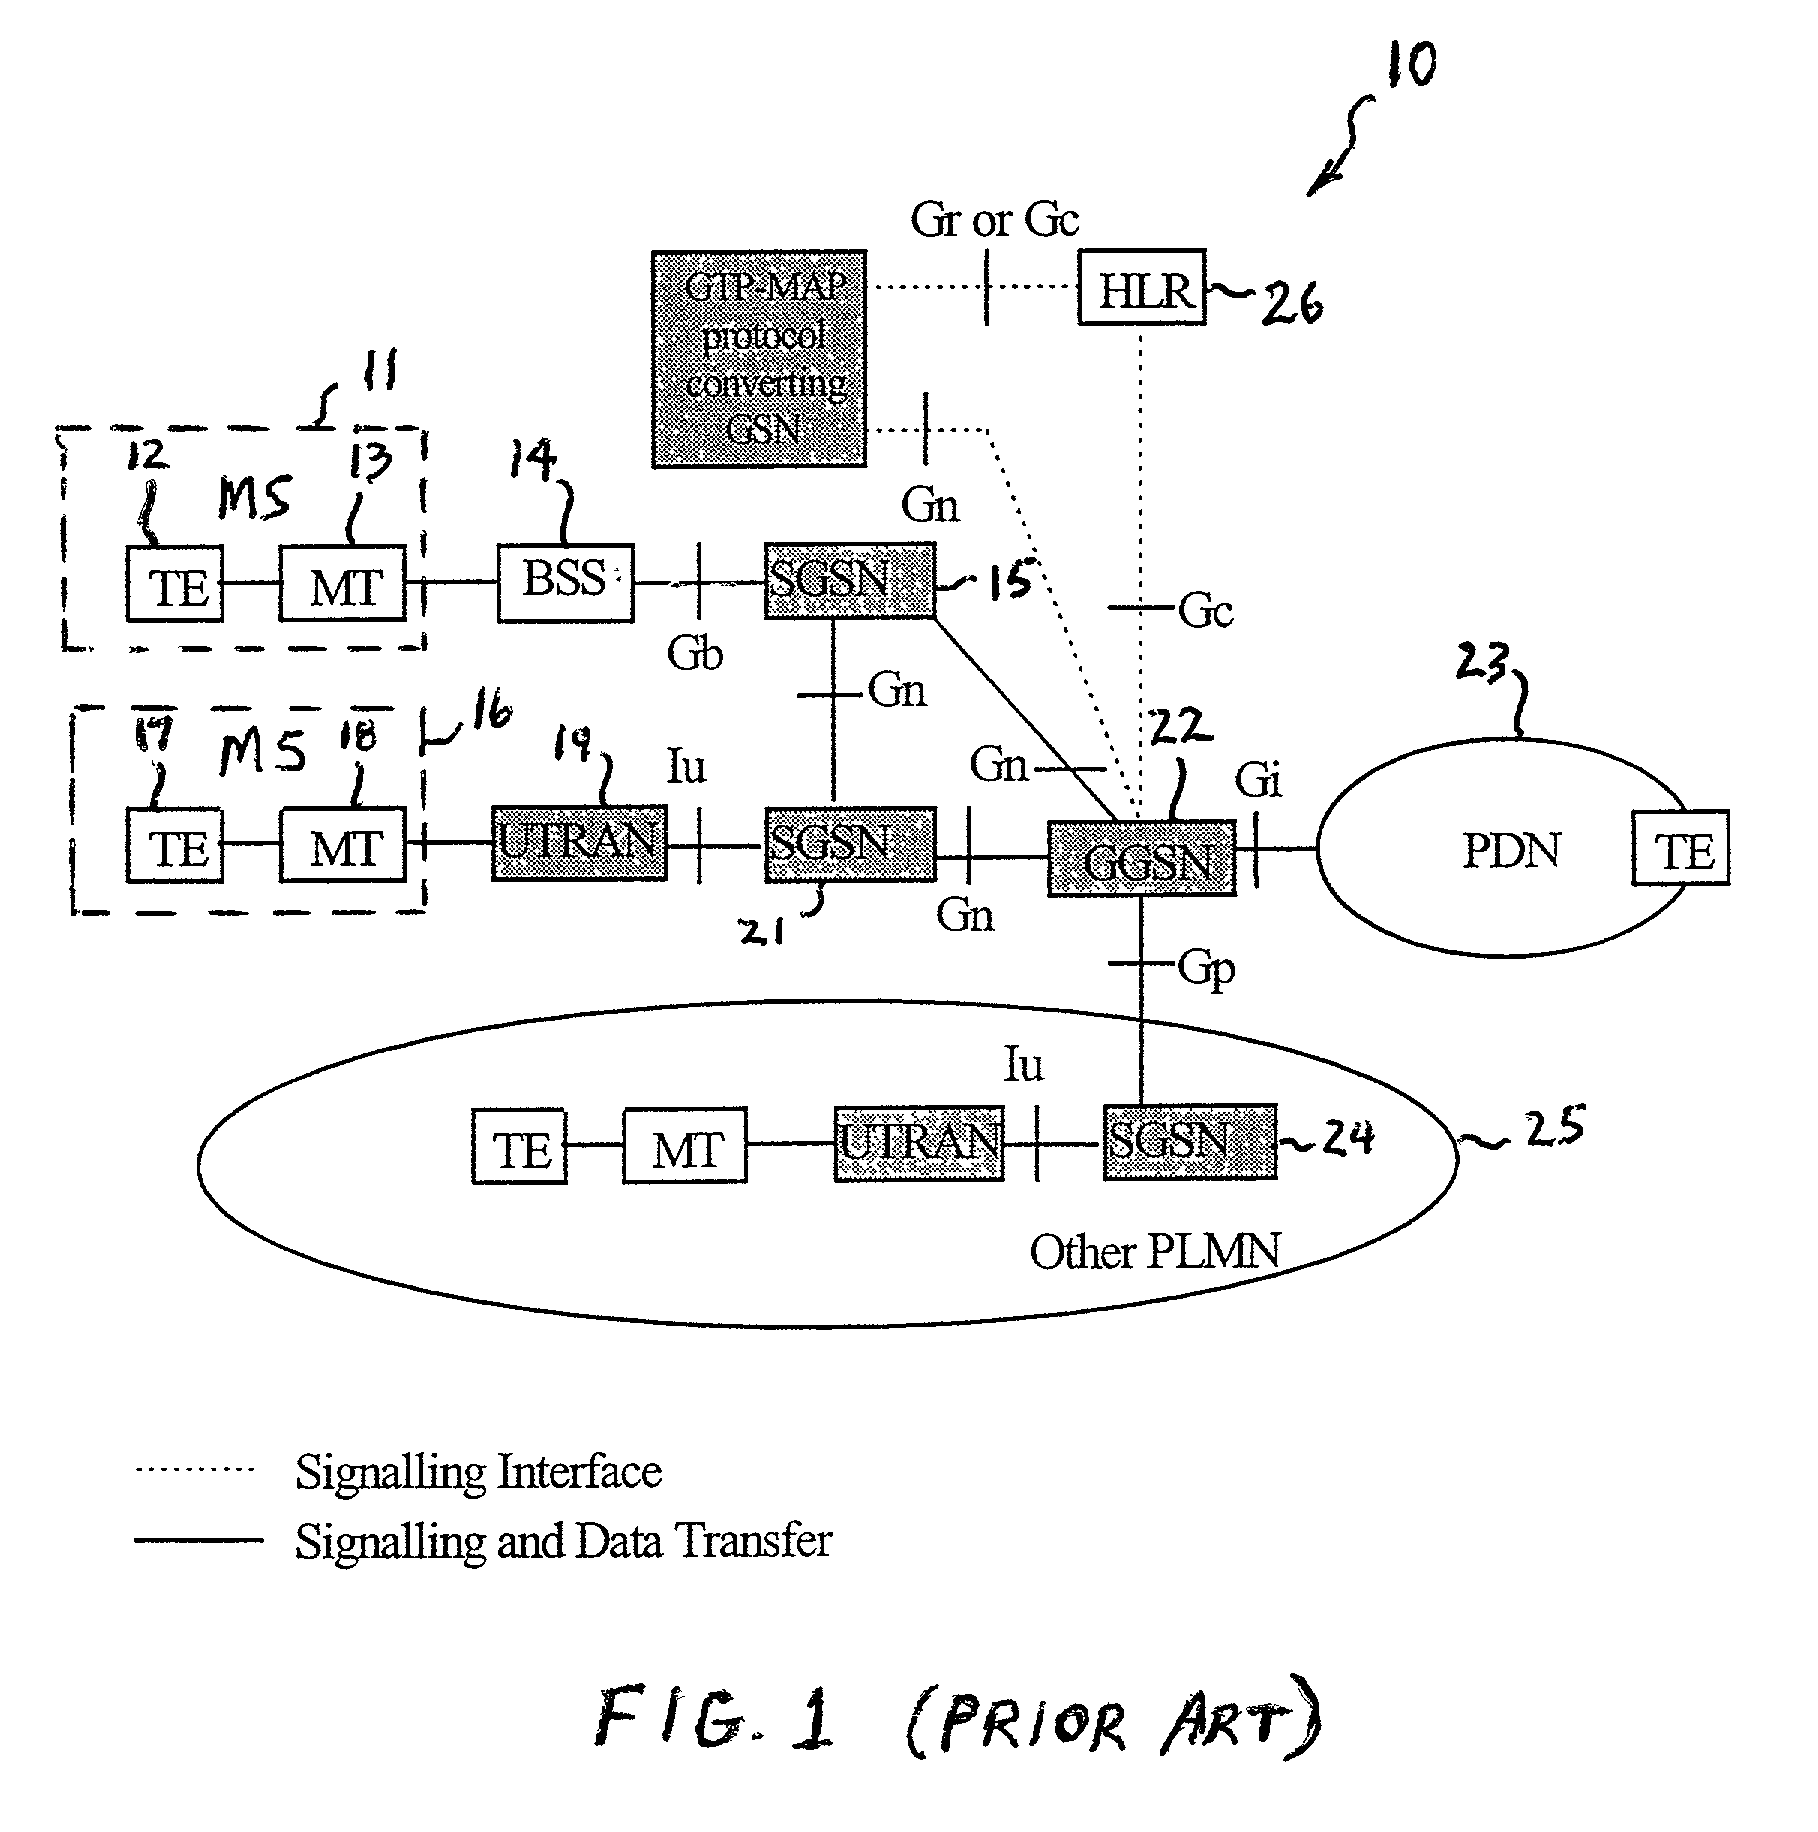 General packet radio service tunneling protocol (GTP) packet filter